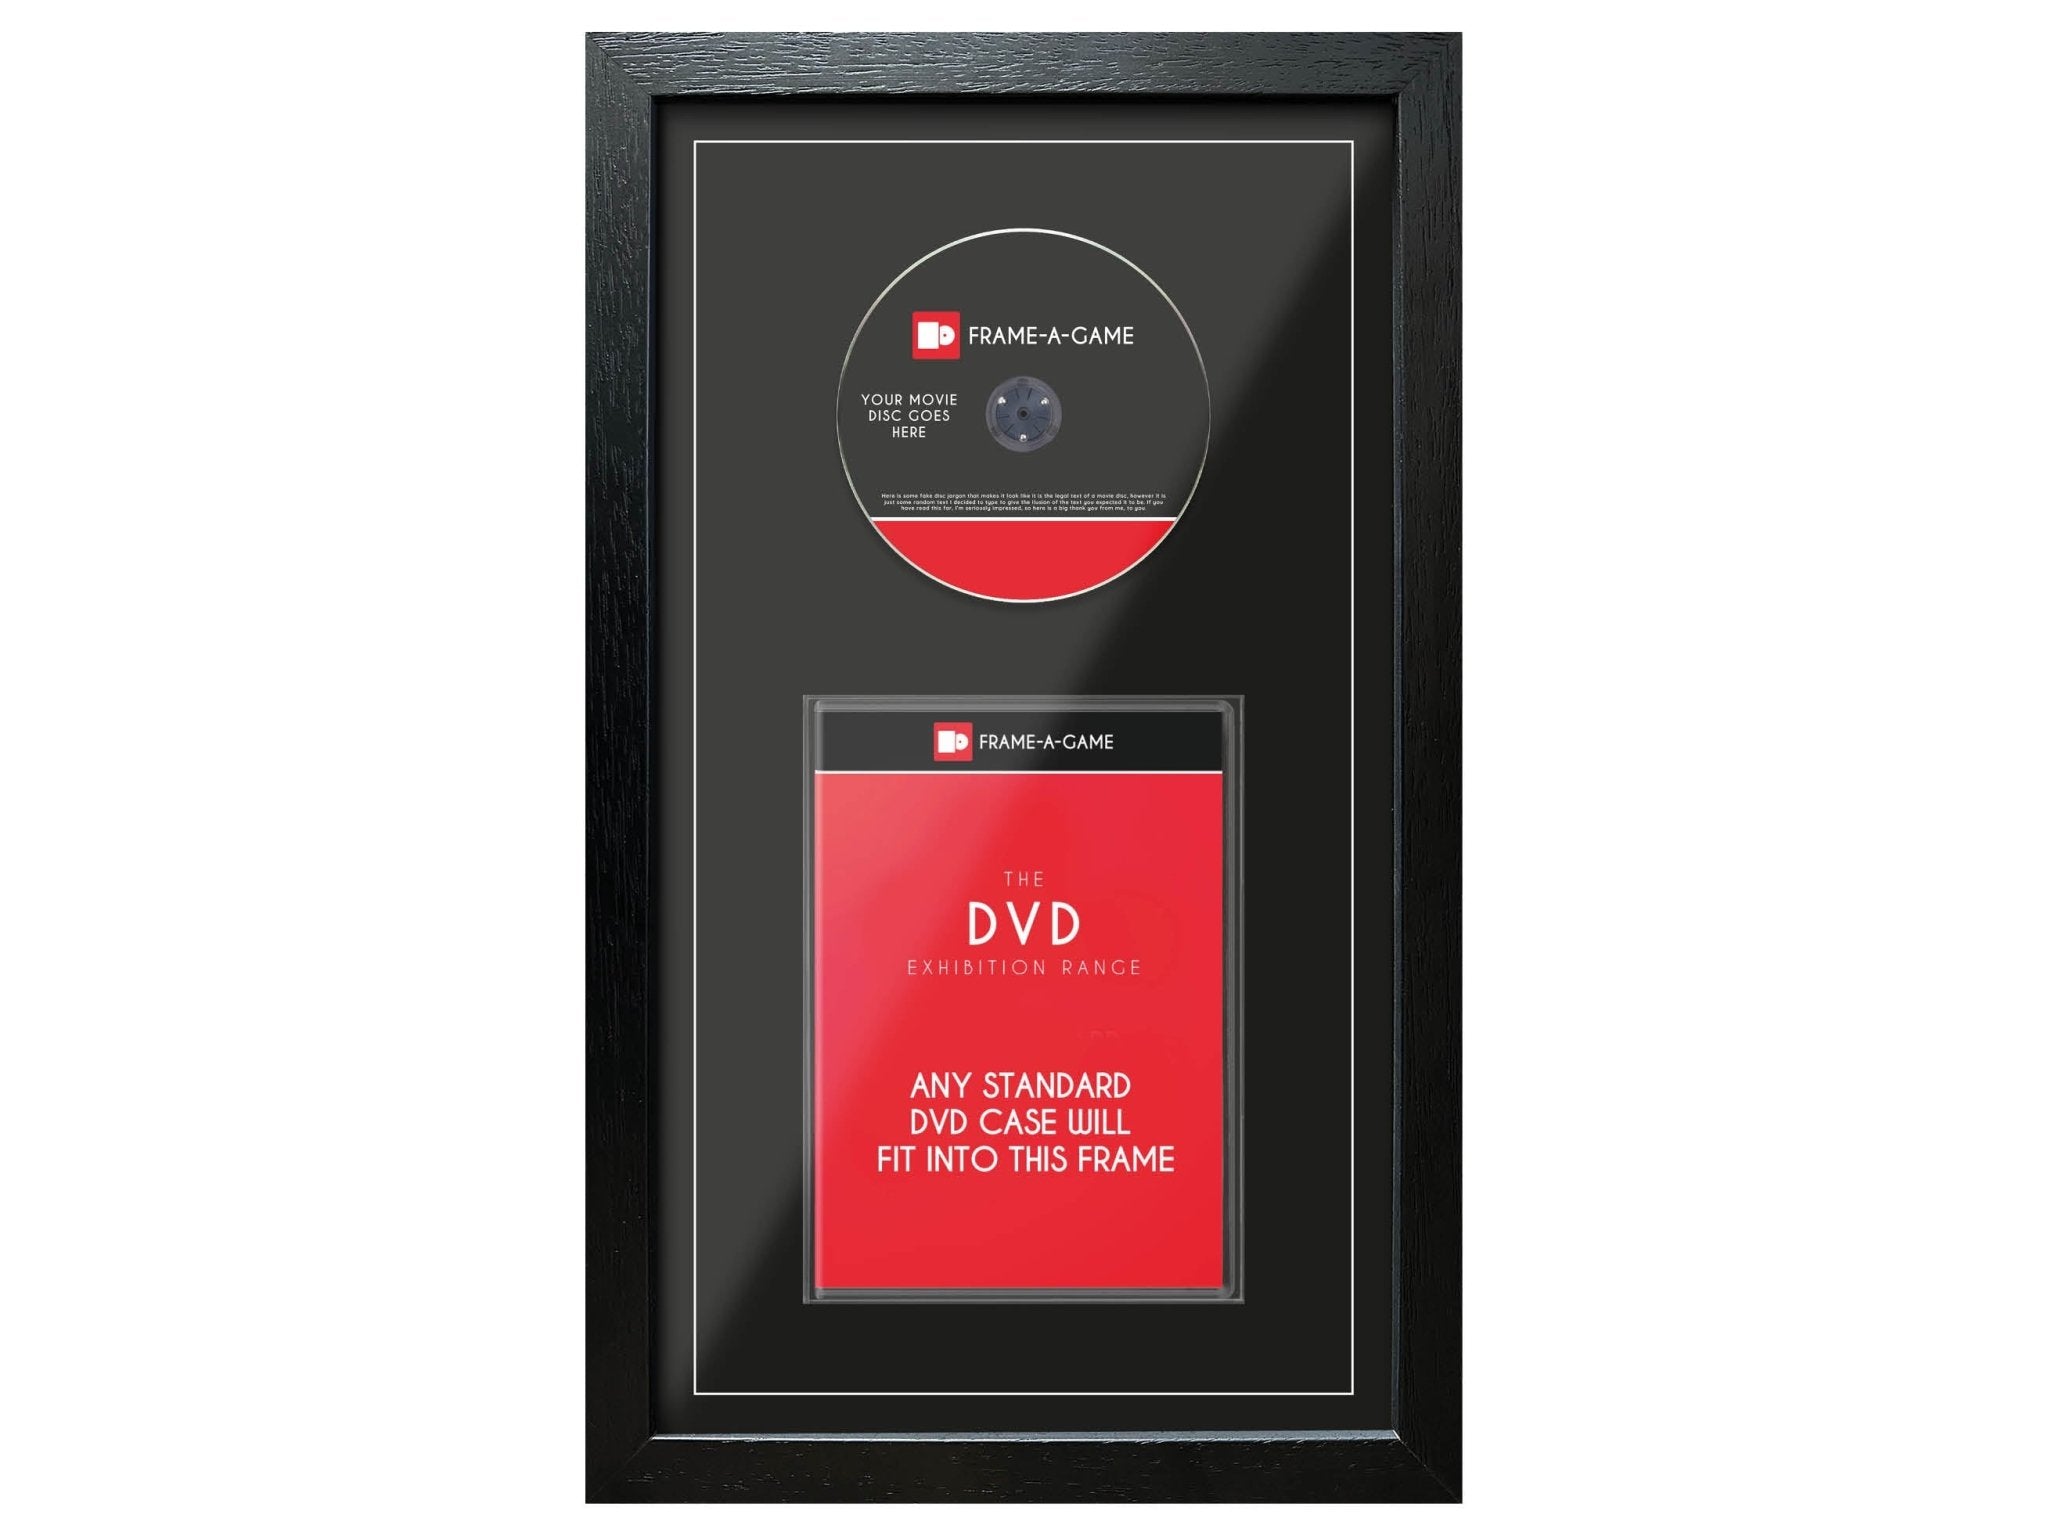 Use your own movie (DVD) Exhibition Range Frame - Frame-A-Game